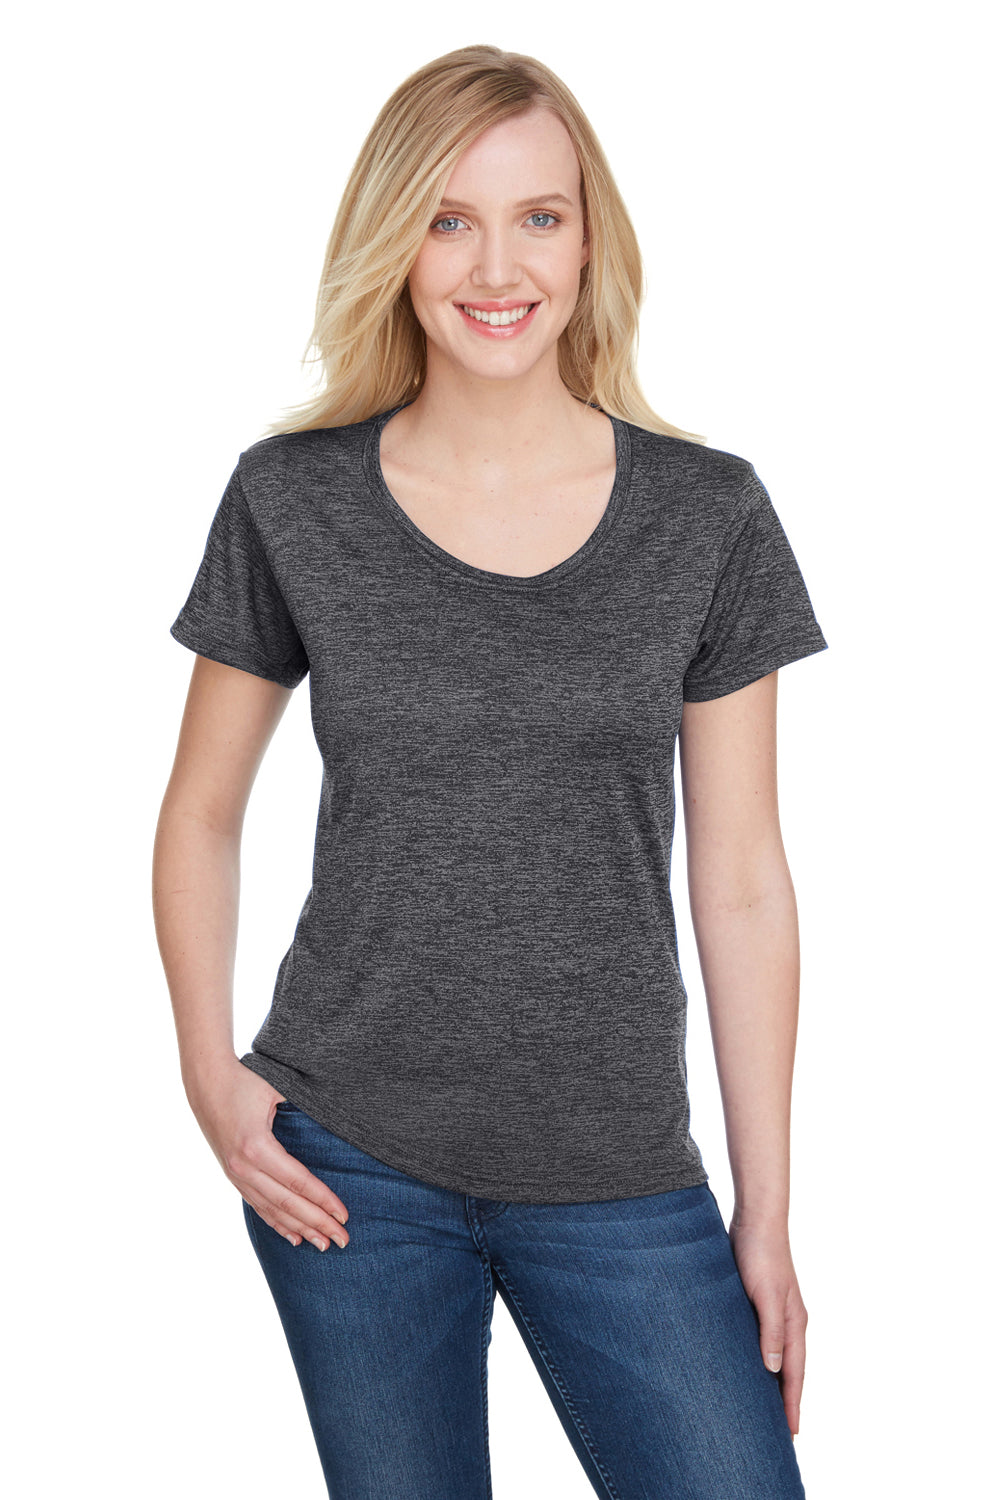 A4 NW3010 Womens Tonal Space Dye Short Sleeve Scoop Neck T-Shirt Charcoal Grey Front